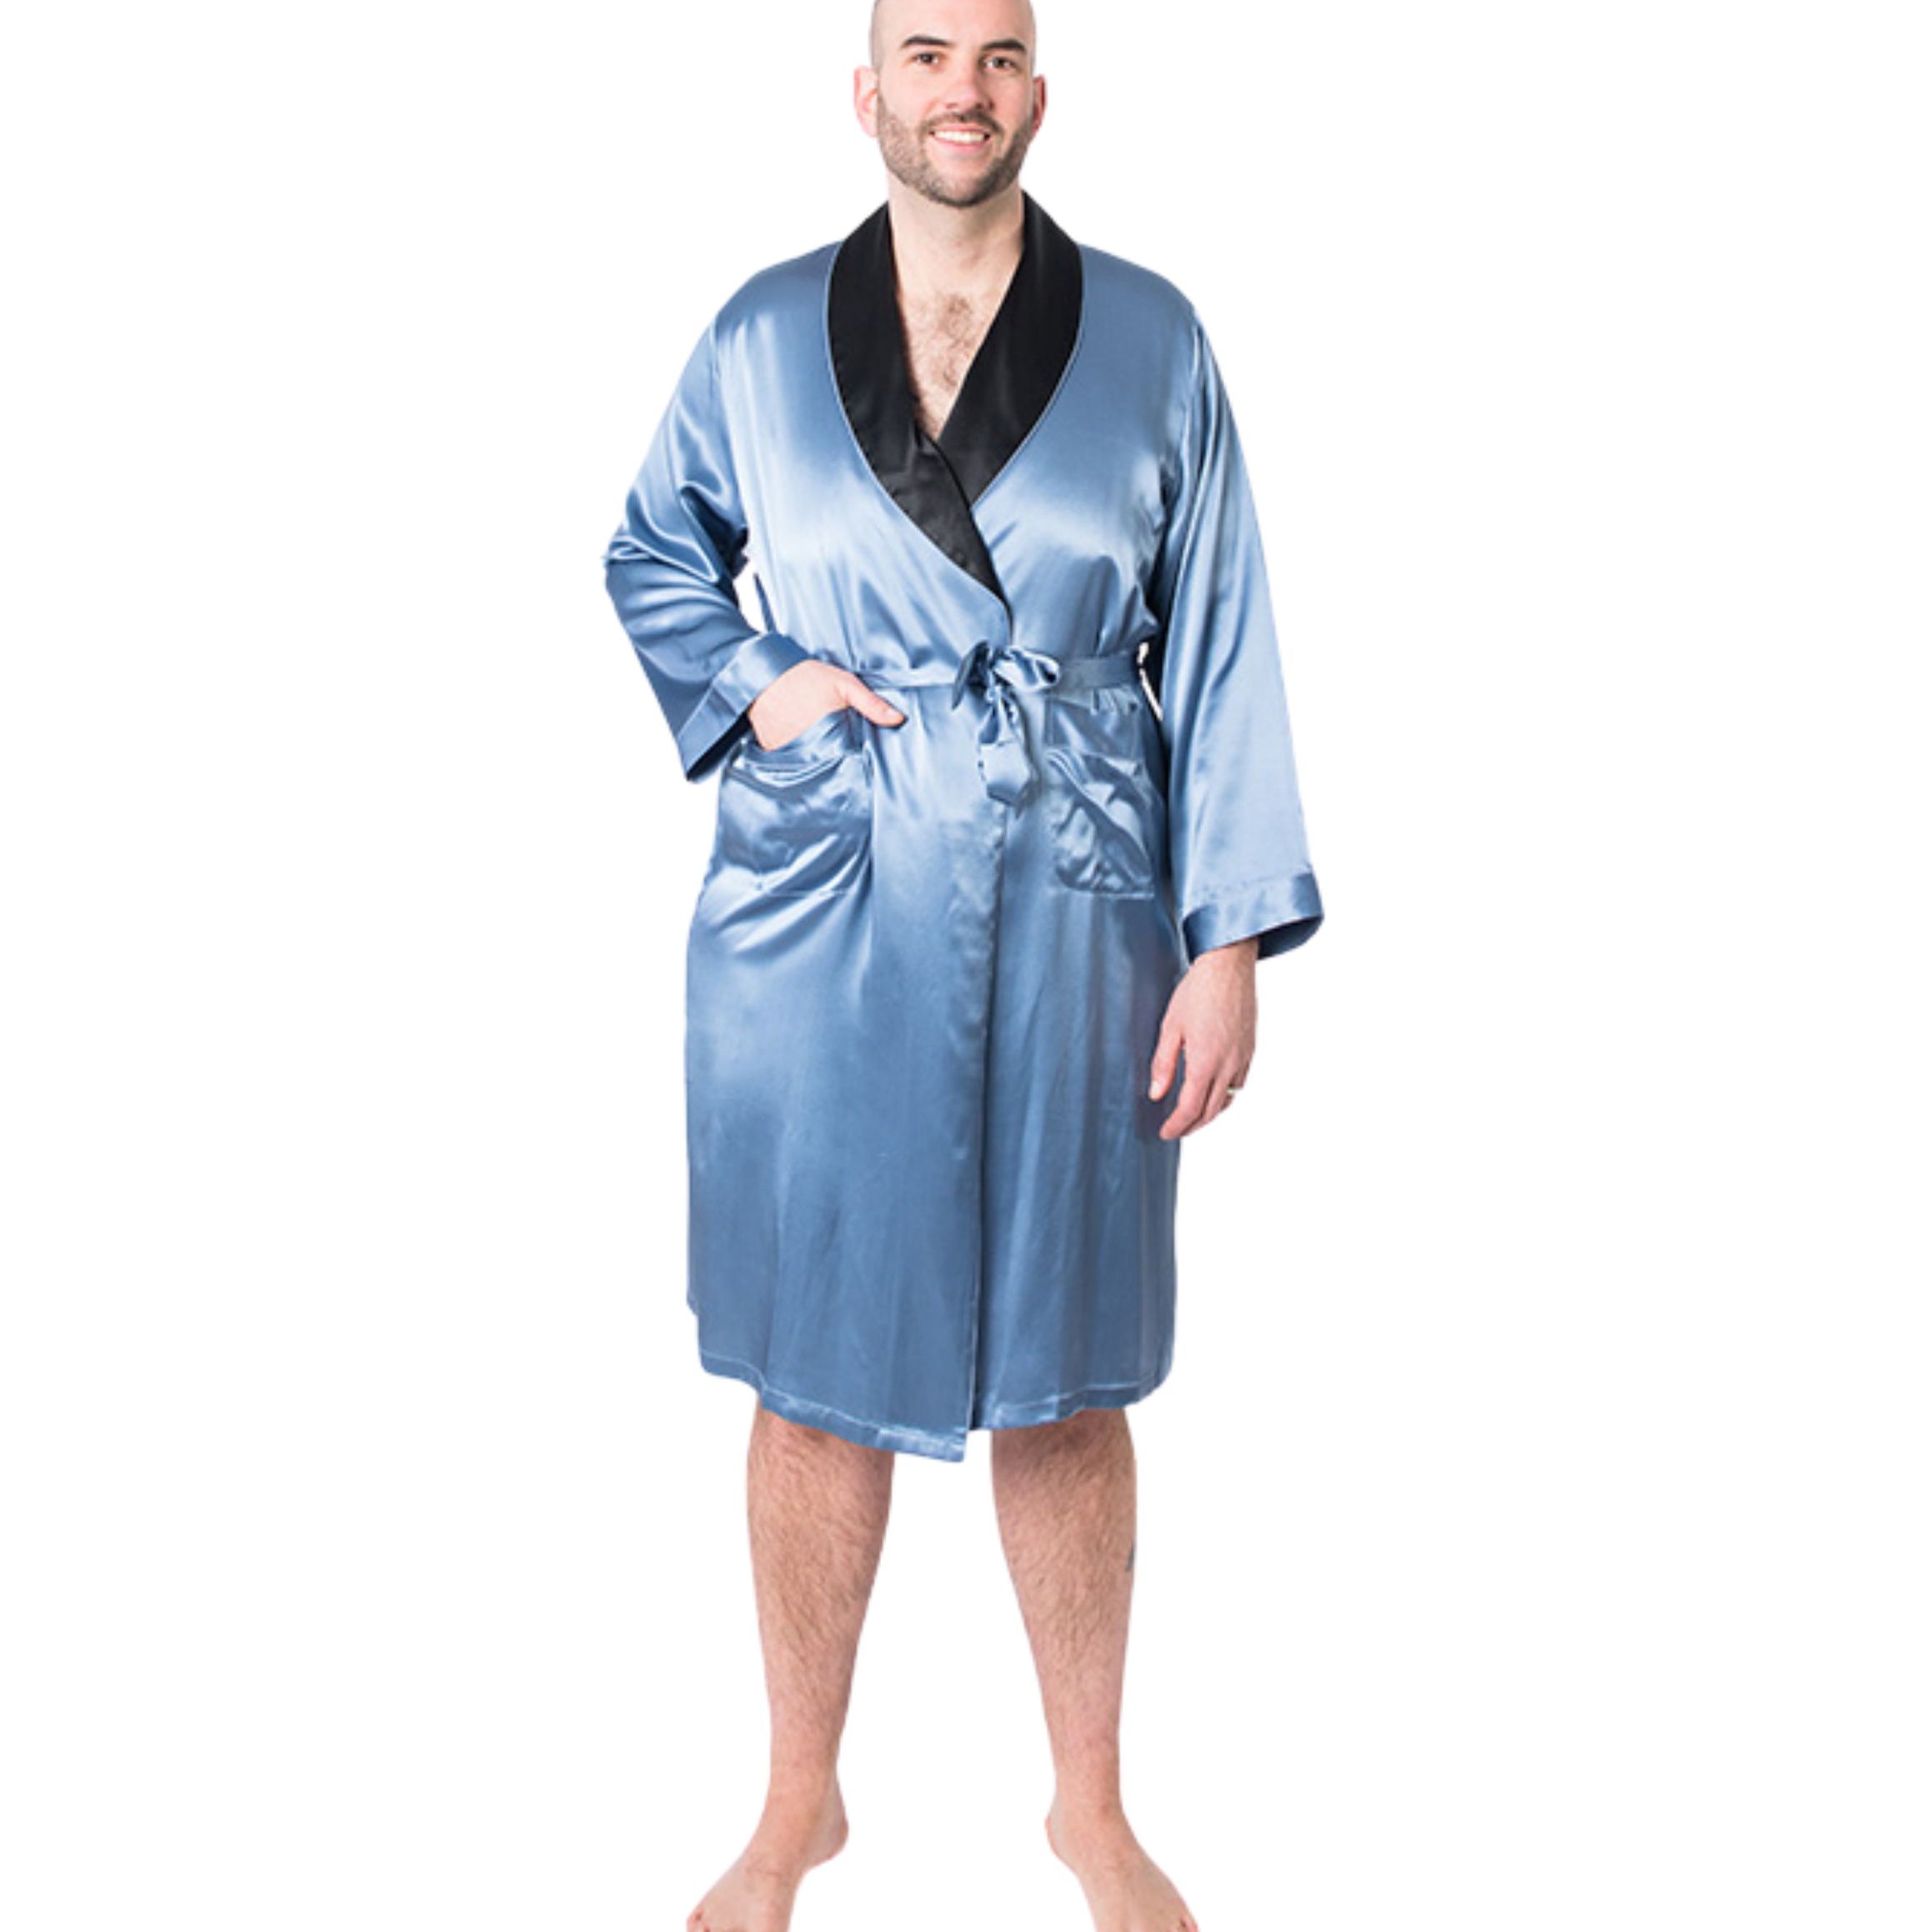  Men's Twilight Blue Robe with Black Collar - Men's Twilight Blue Robe with Black Collar -  -  - Luxurious Fine Silk by Forsters Finery